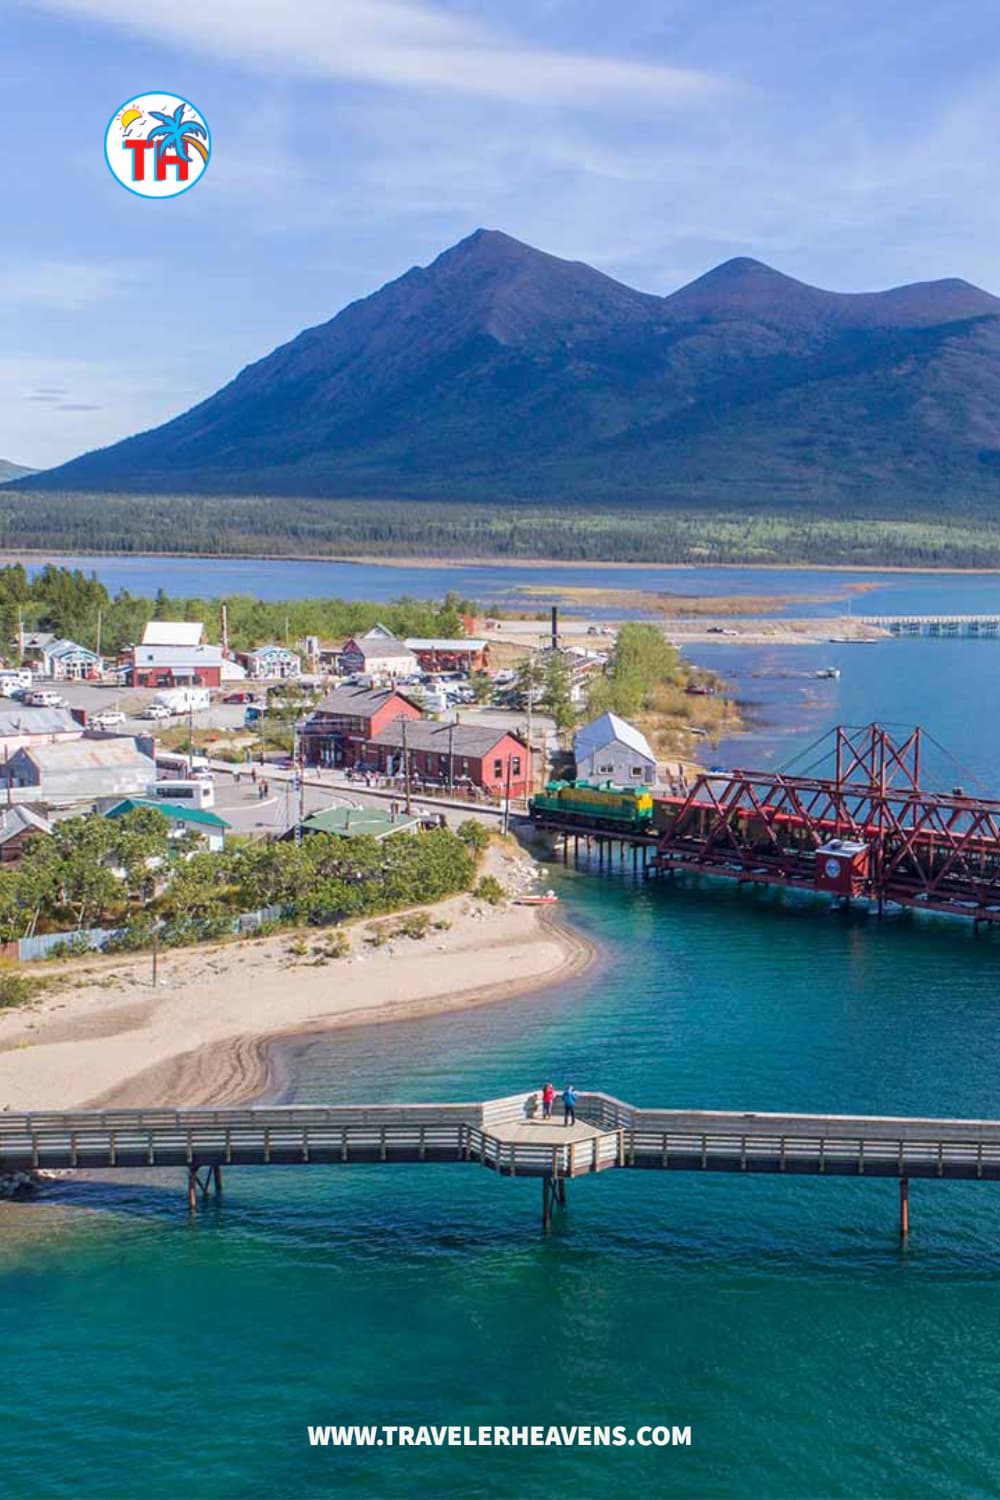 Beautiful Destinations, Best Places to Visit in Yukon, Canada, Canada Travel Guide, Travel to Yukon, Visit Yukon